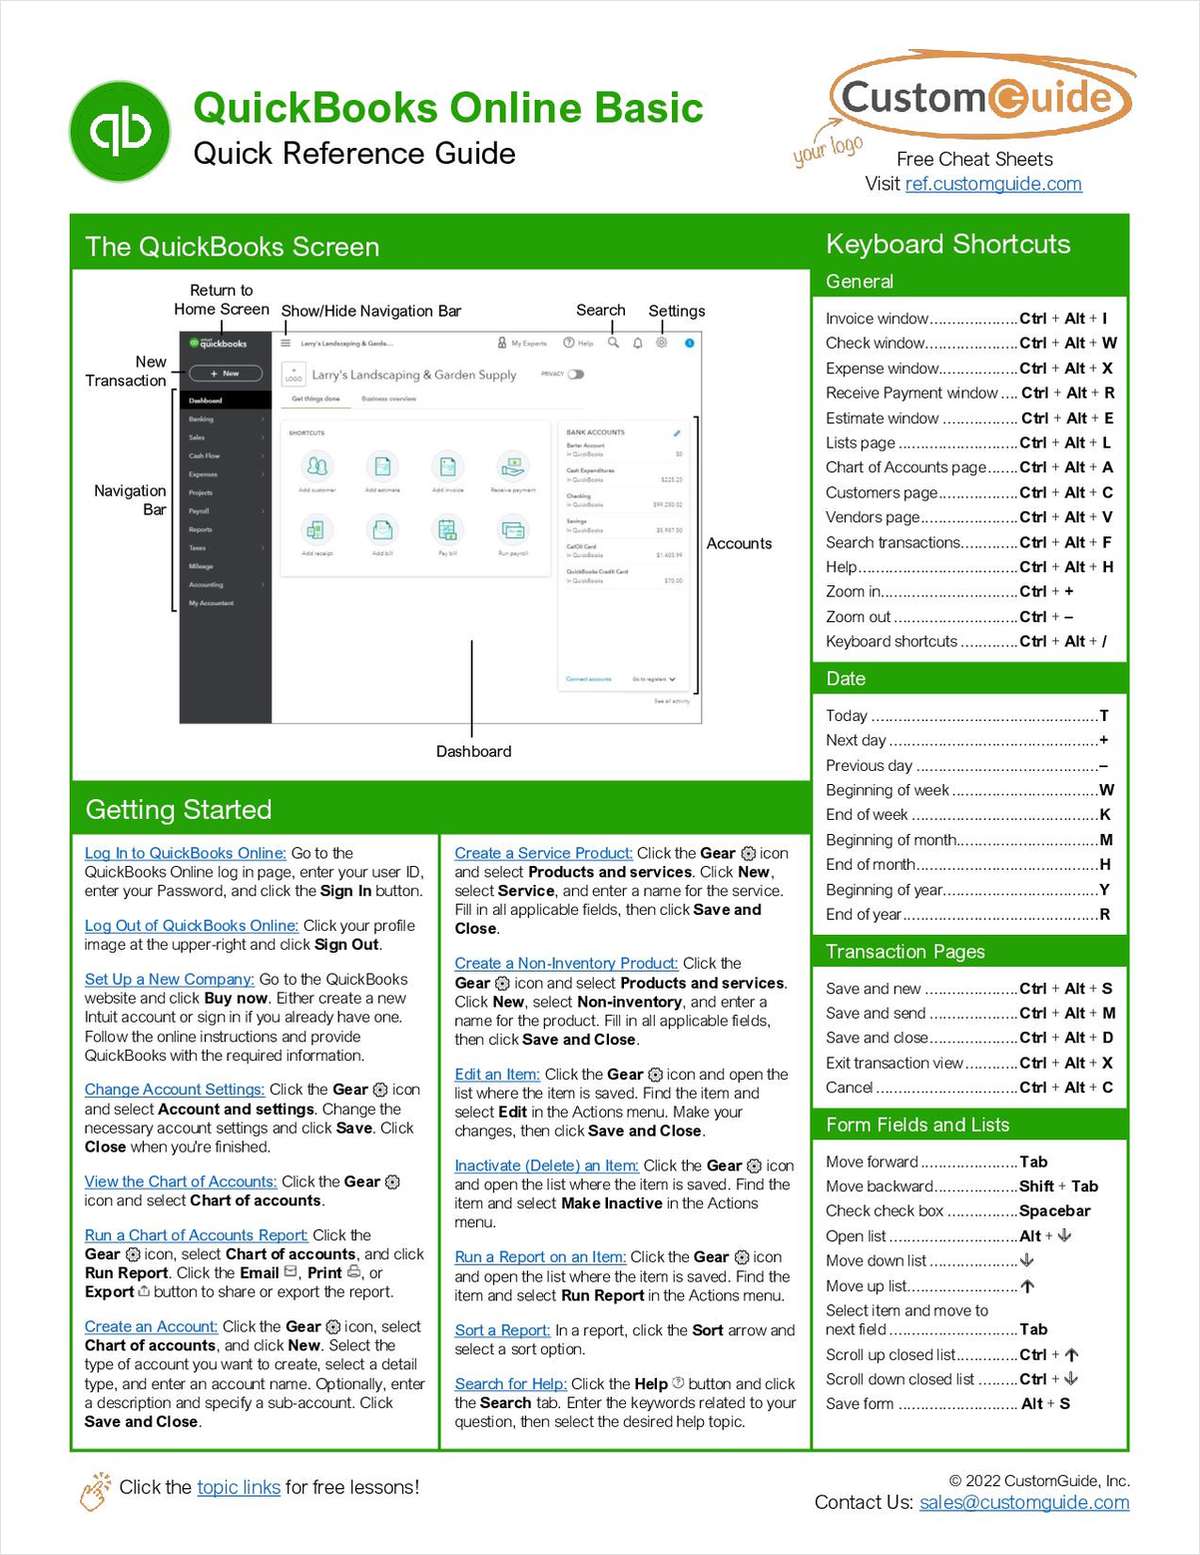 Quickbooks Quick Reference Guide